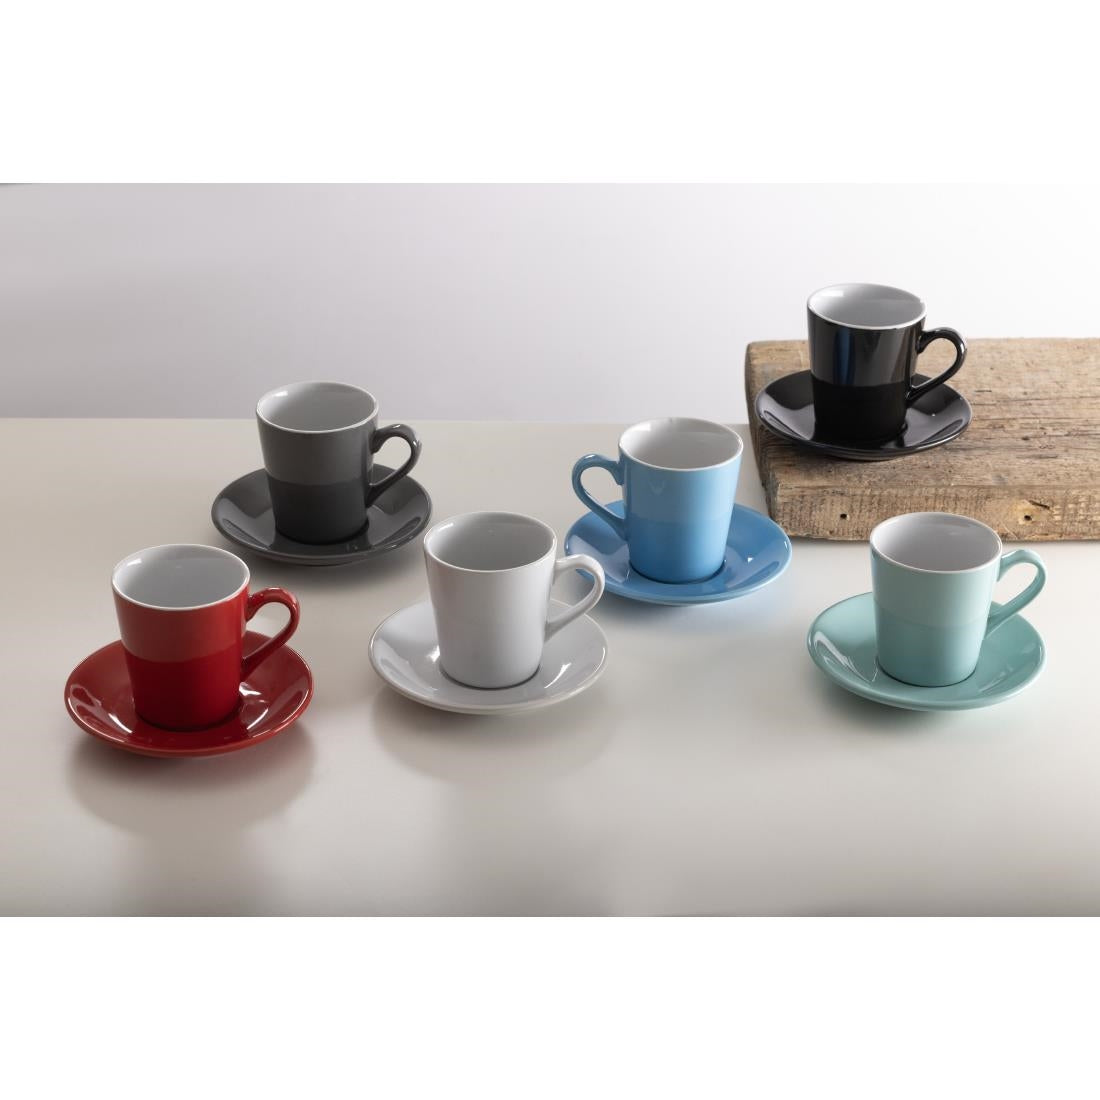 Olympia Cafe Flat White Saucers Aqua 135mm (Pack of 12)